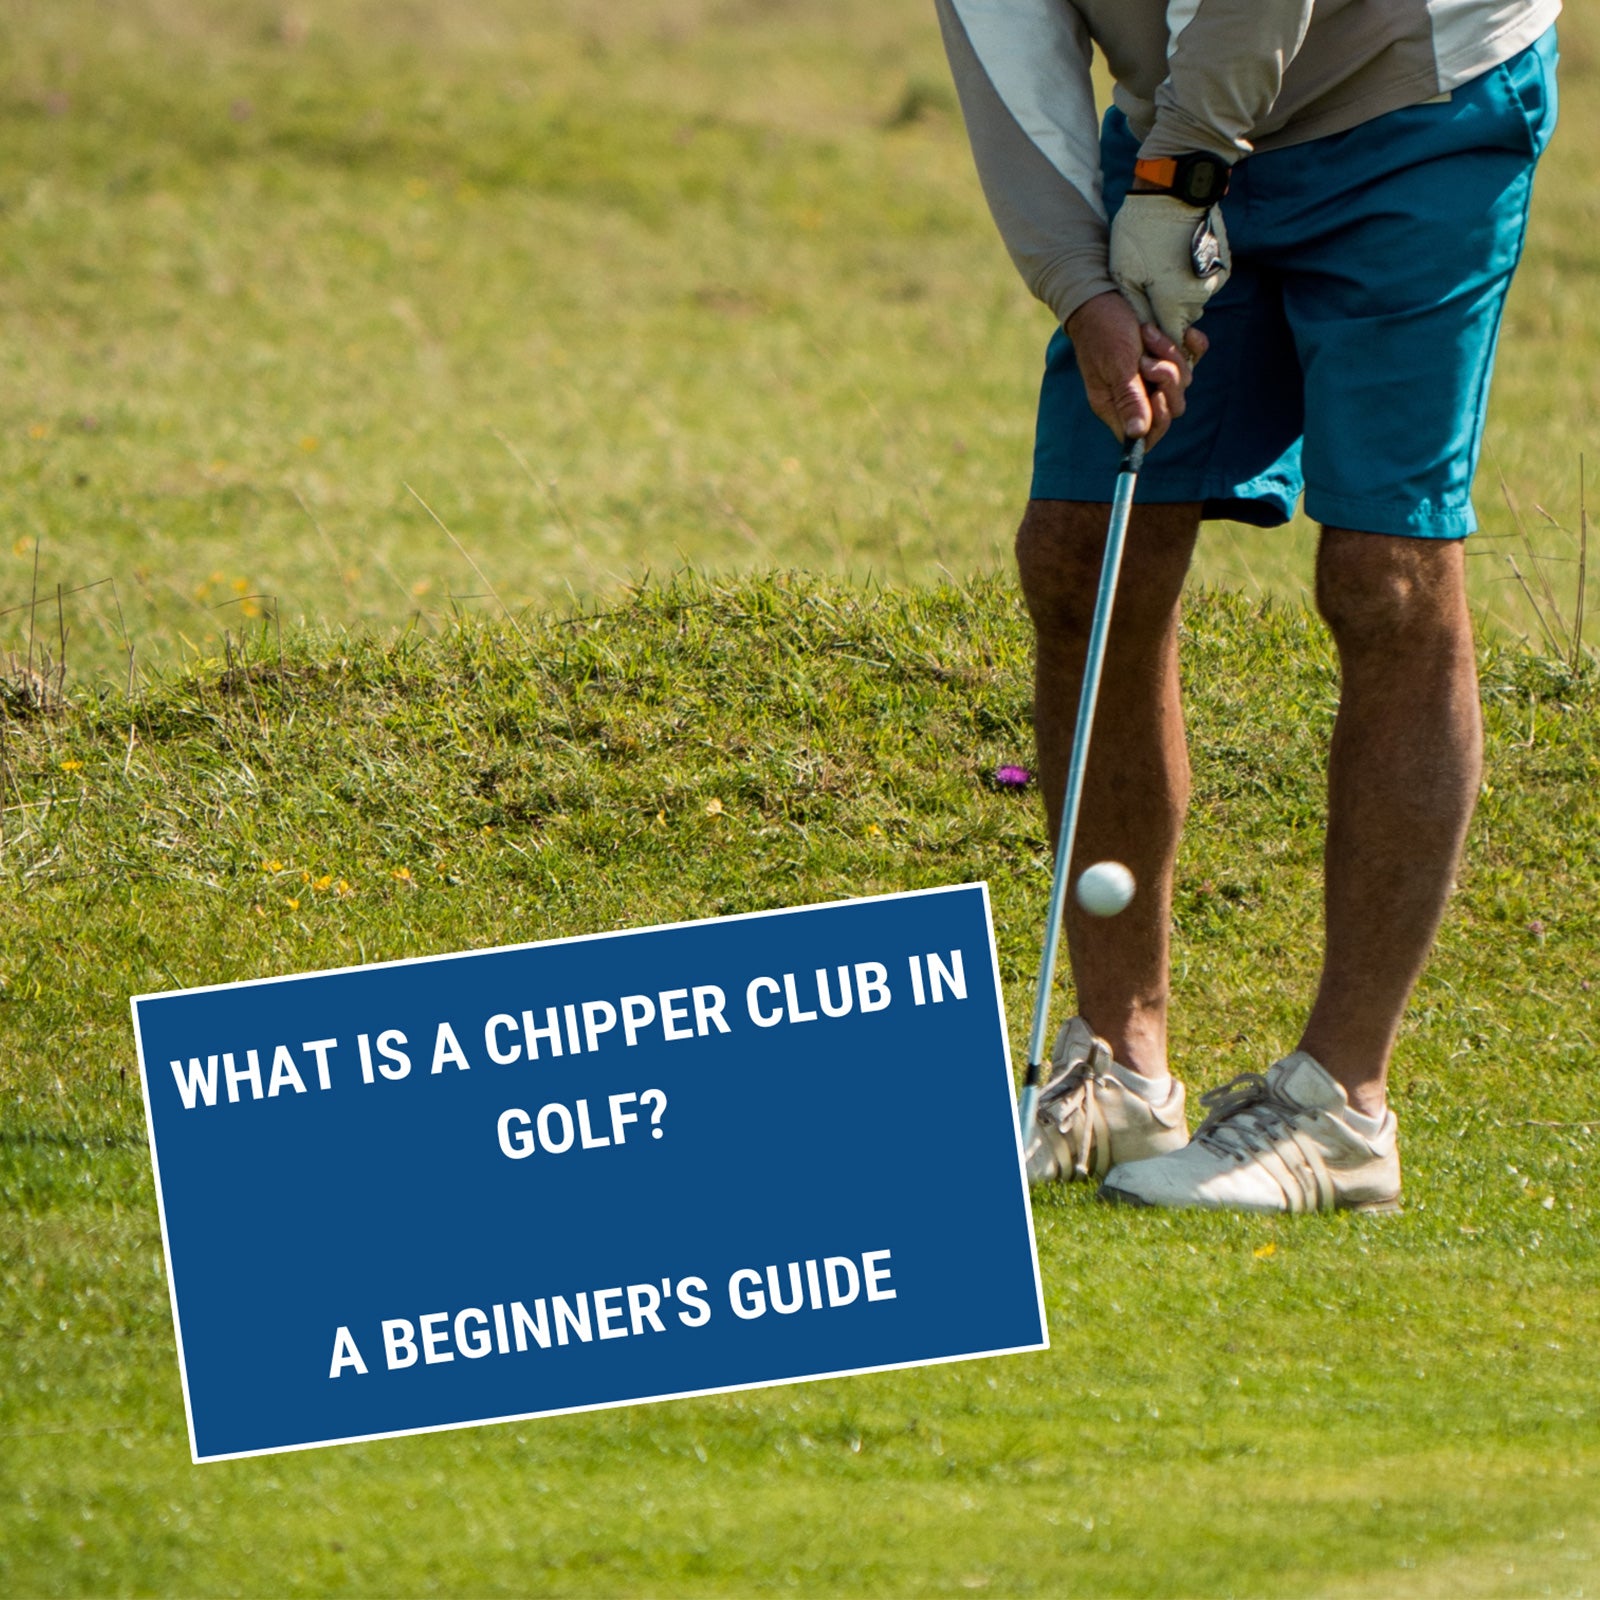 What Is A Chipper Club In Golf? A Beginner's Guide – More Sports